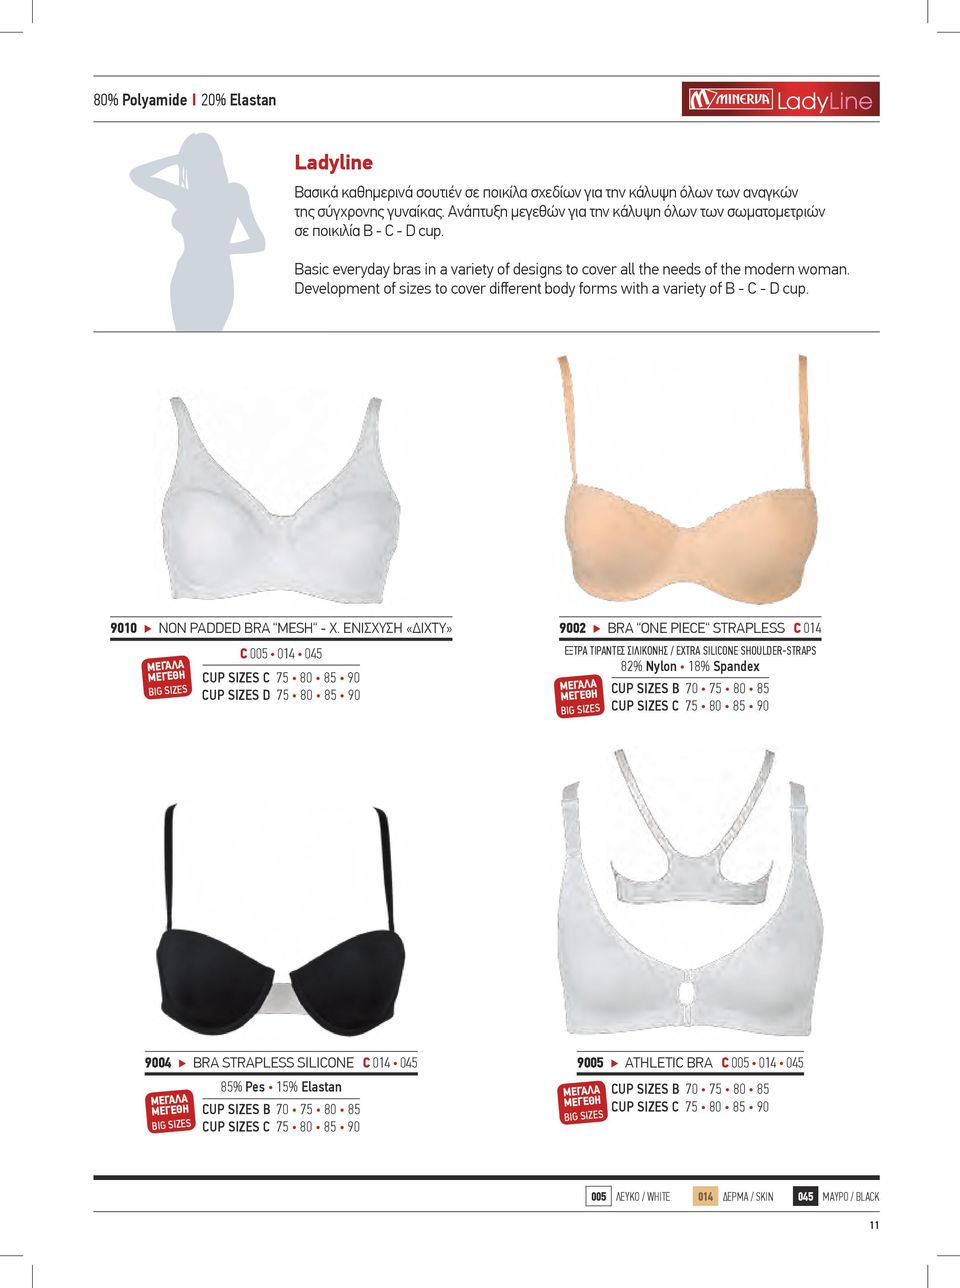 Development of sizes to cover different body forms with a variety of B - C - D cup. 9010 ΝON PADDED BRA MESH - X.